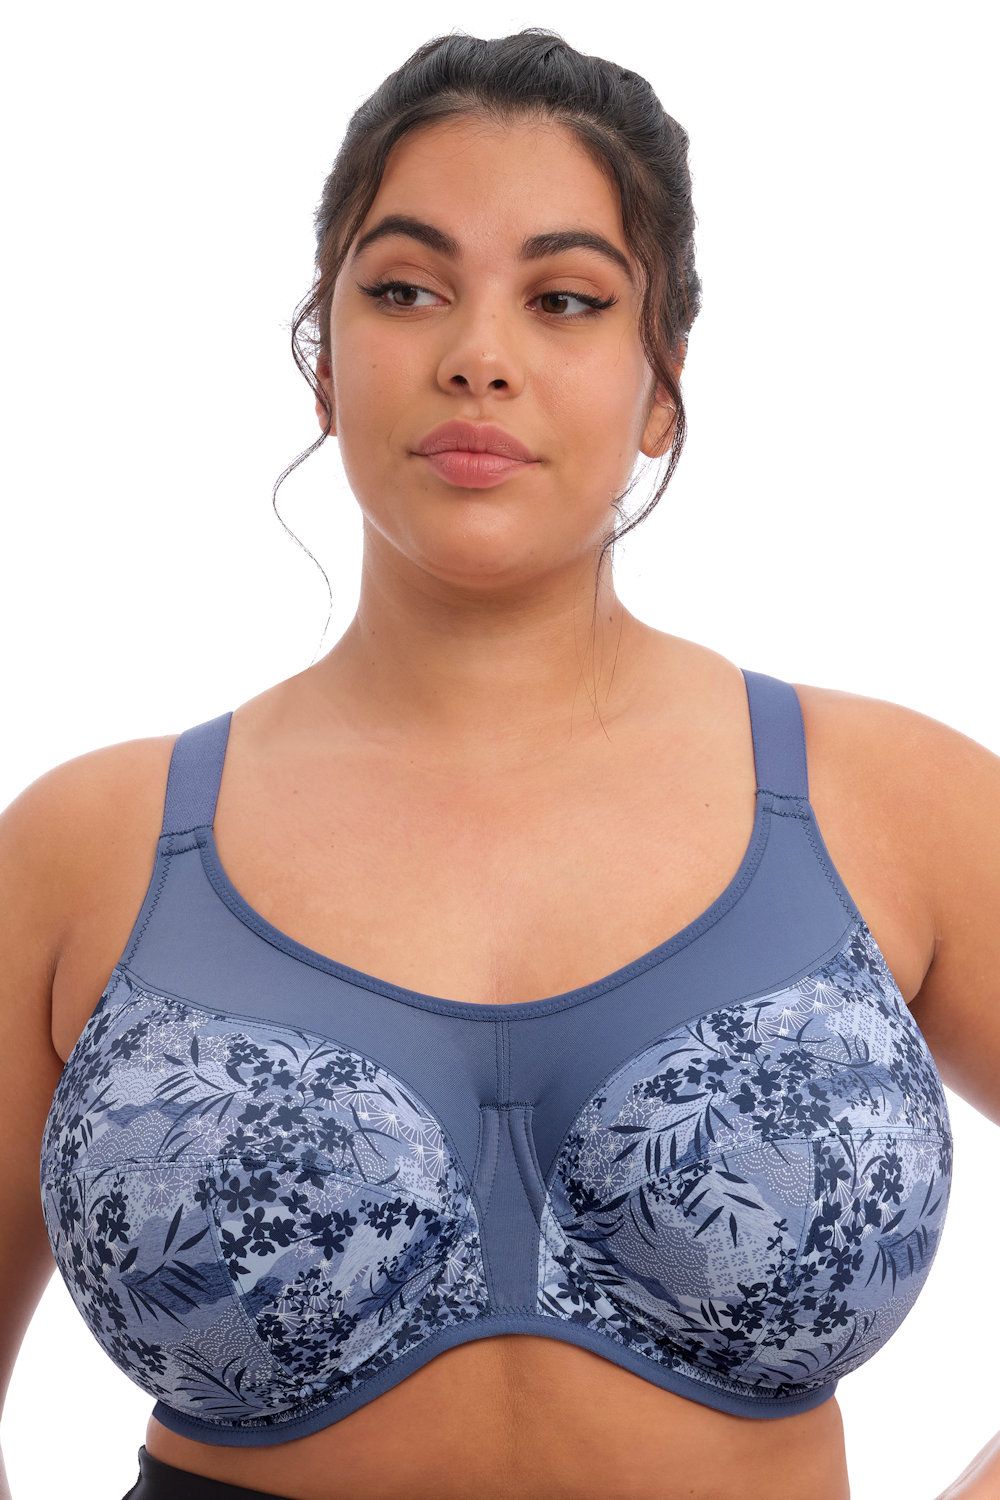 Women's Professional Wireless Sports Bra for Large Bust